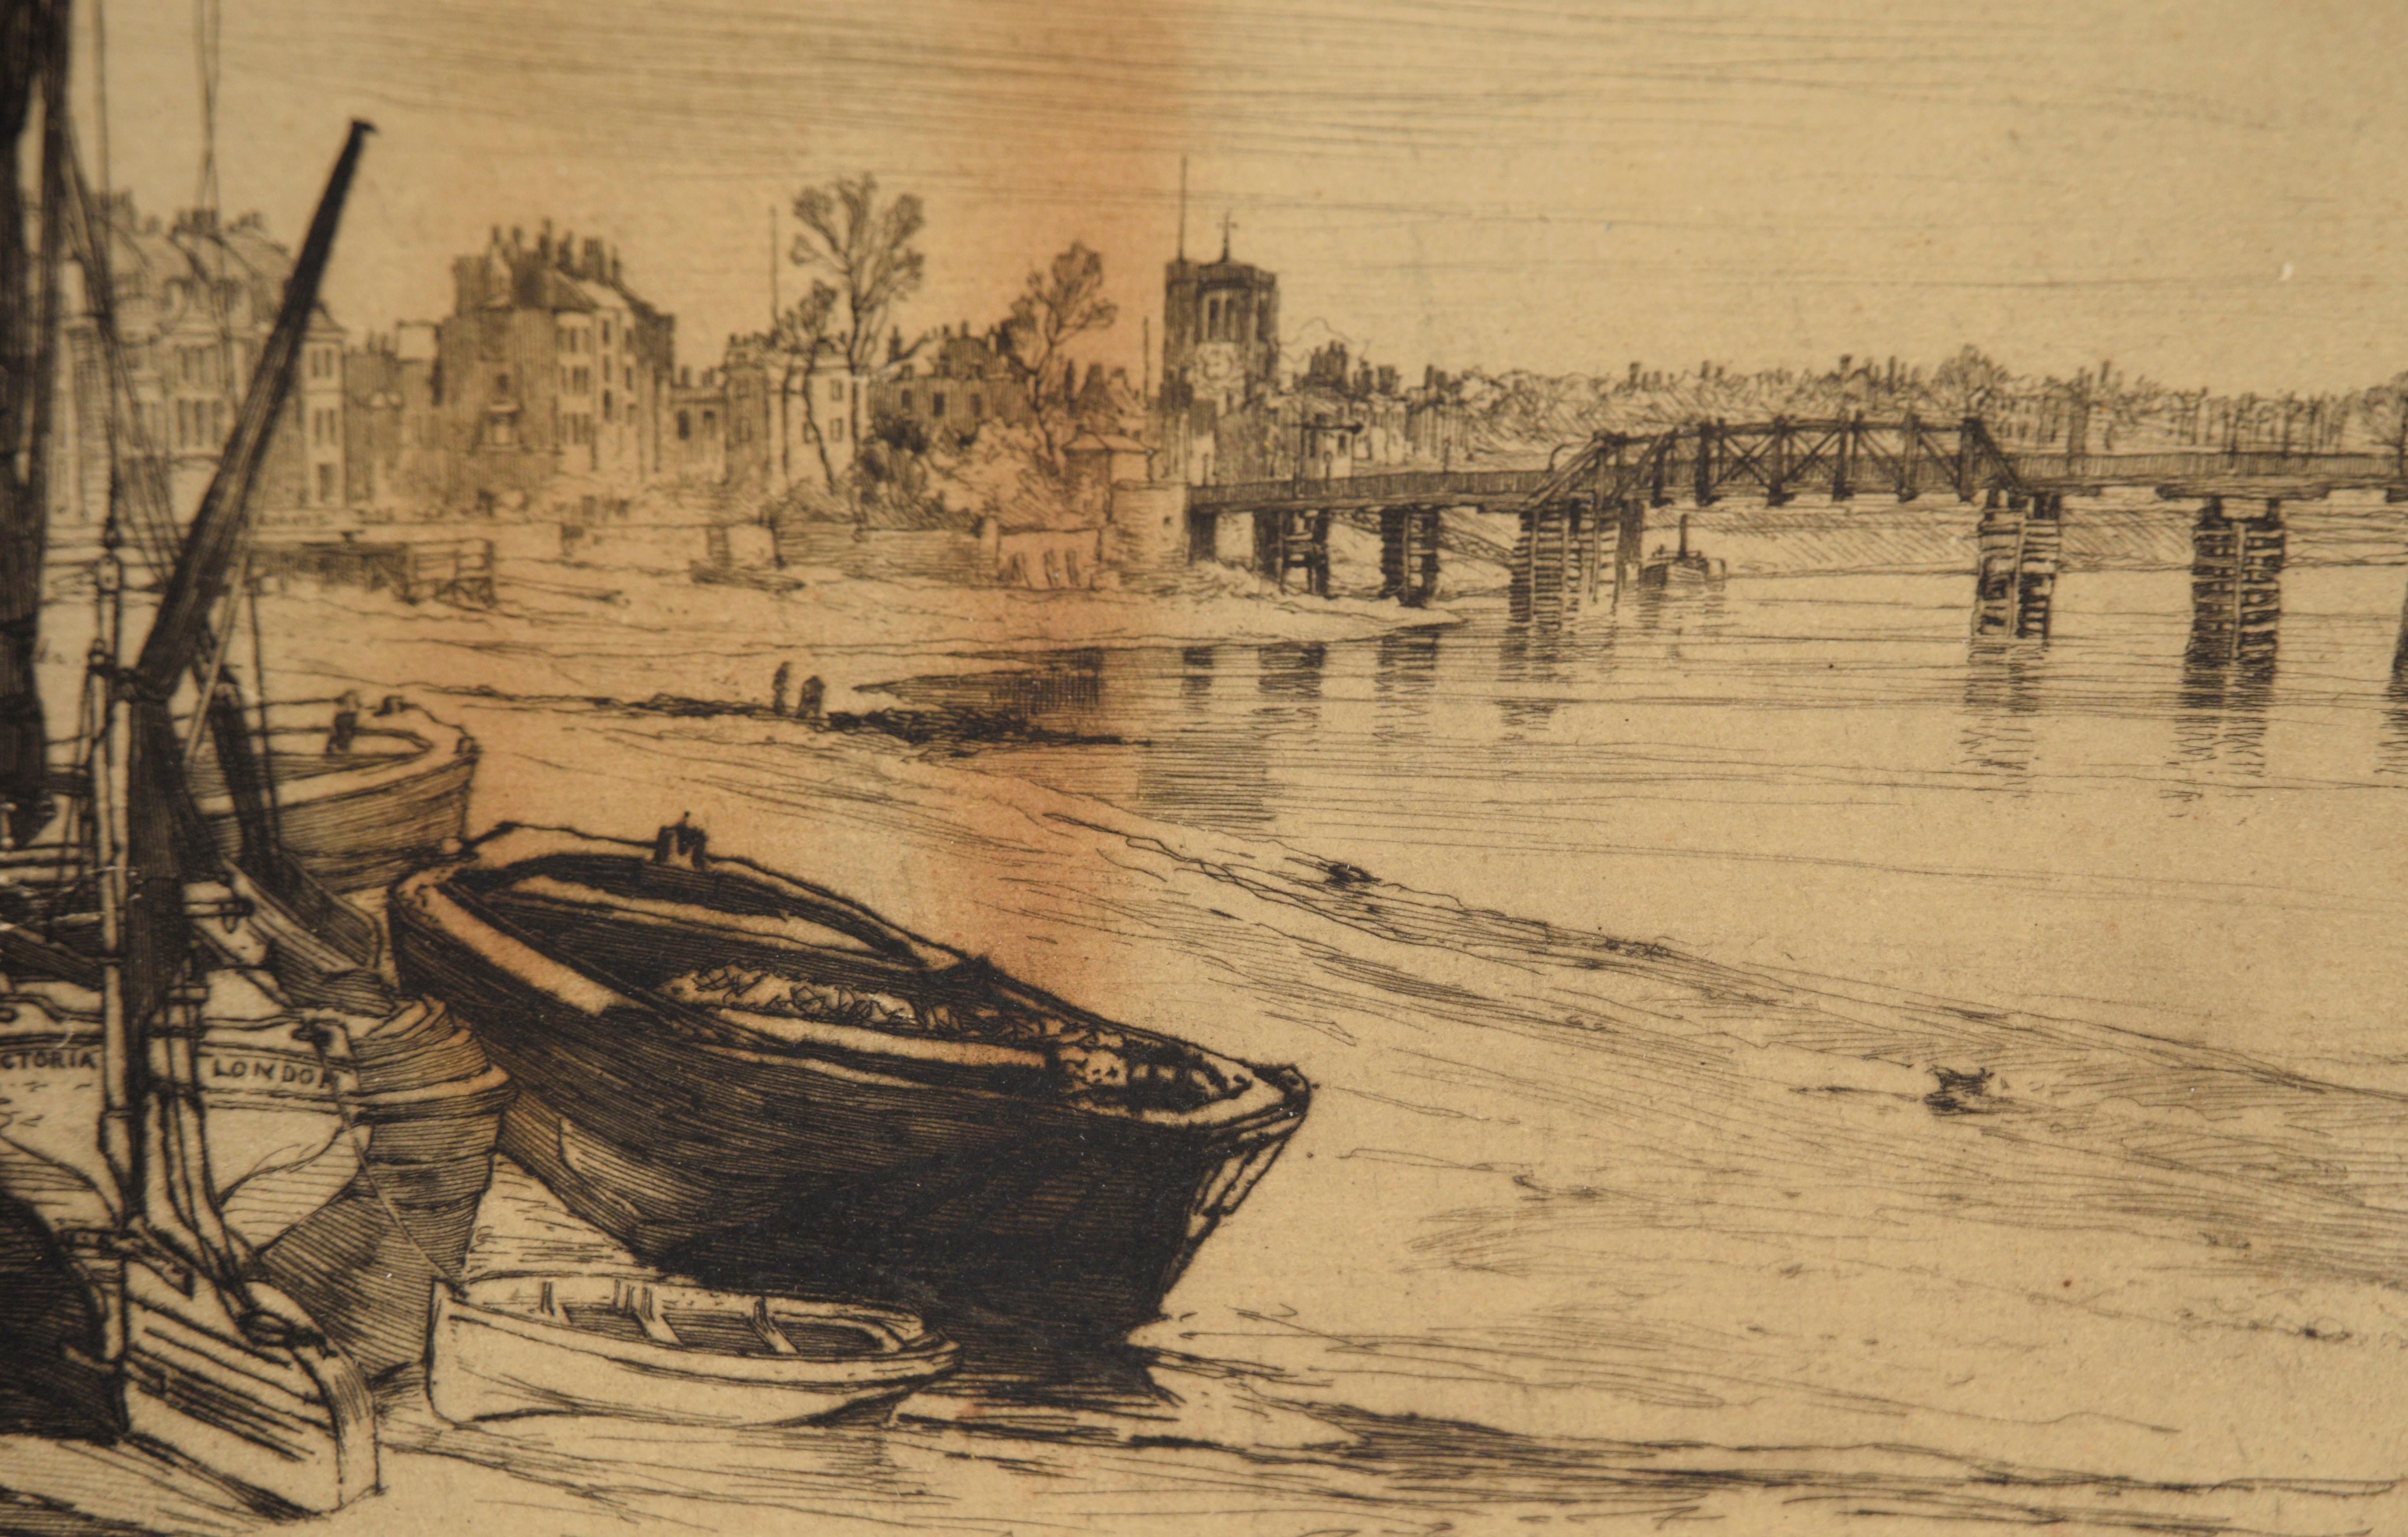 Old Battersea Bridge View, Chelsea, 1879 - Etching on Paper

Black and white 1897 etching titled 